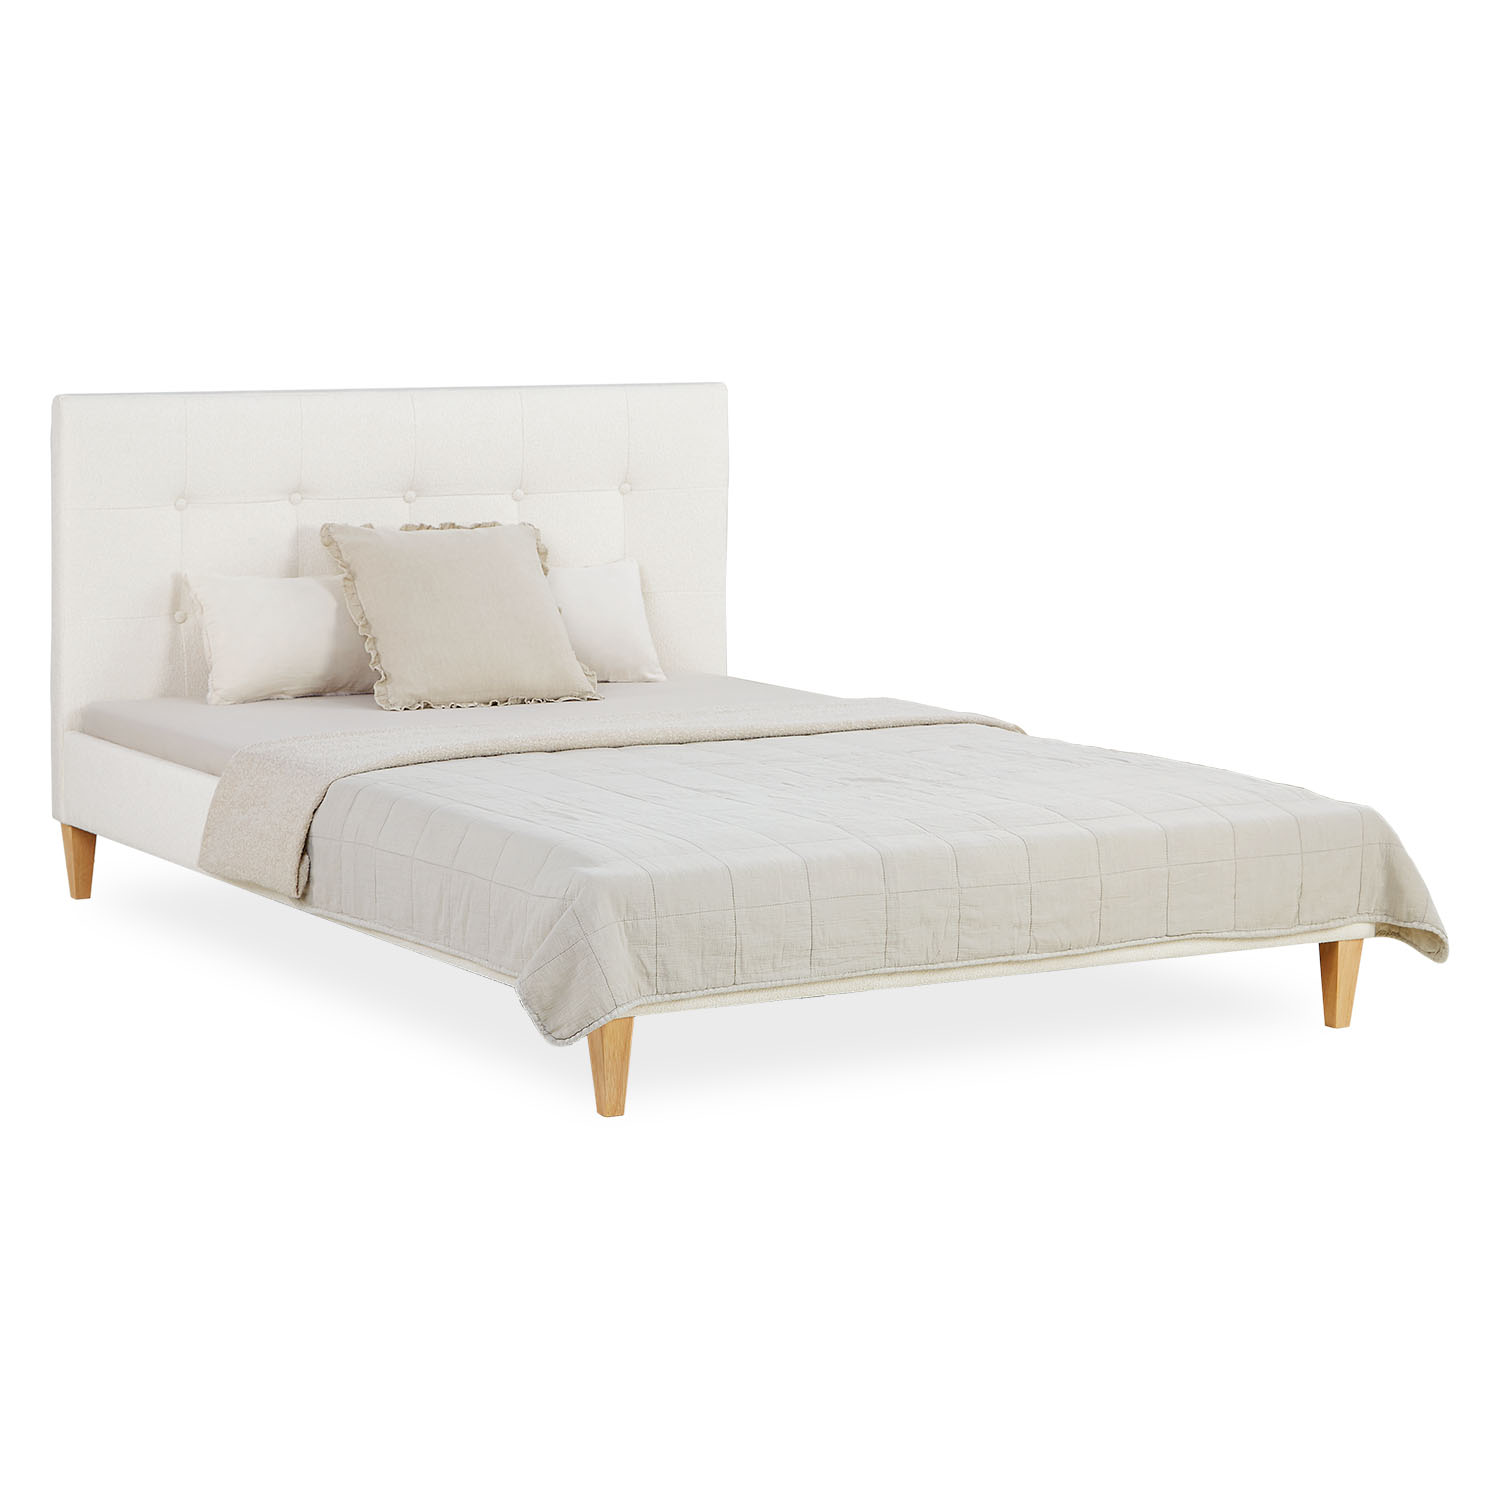 Small Double Bed 140x200 cm with Mattress Bouclé Beige Upholstered Bed with Slatted Frame Fabric Bed Frame